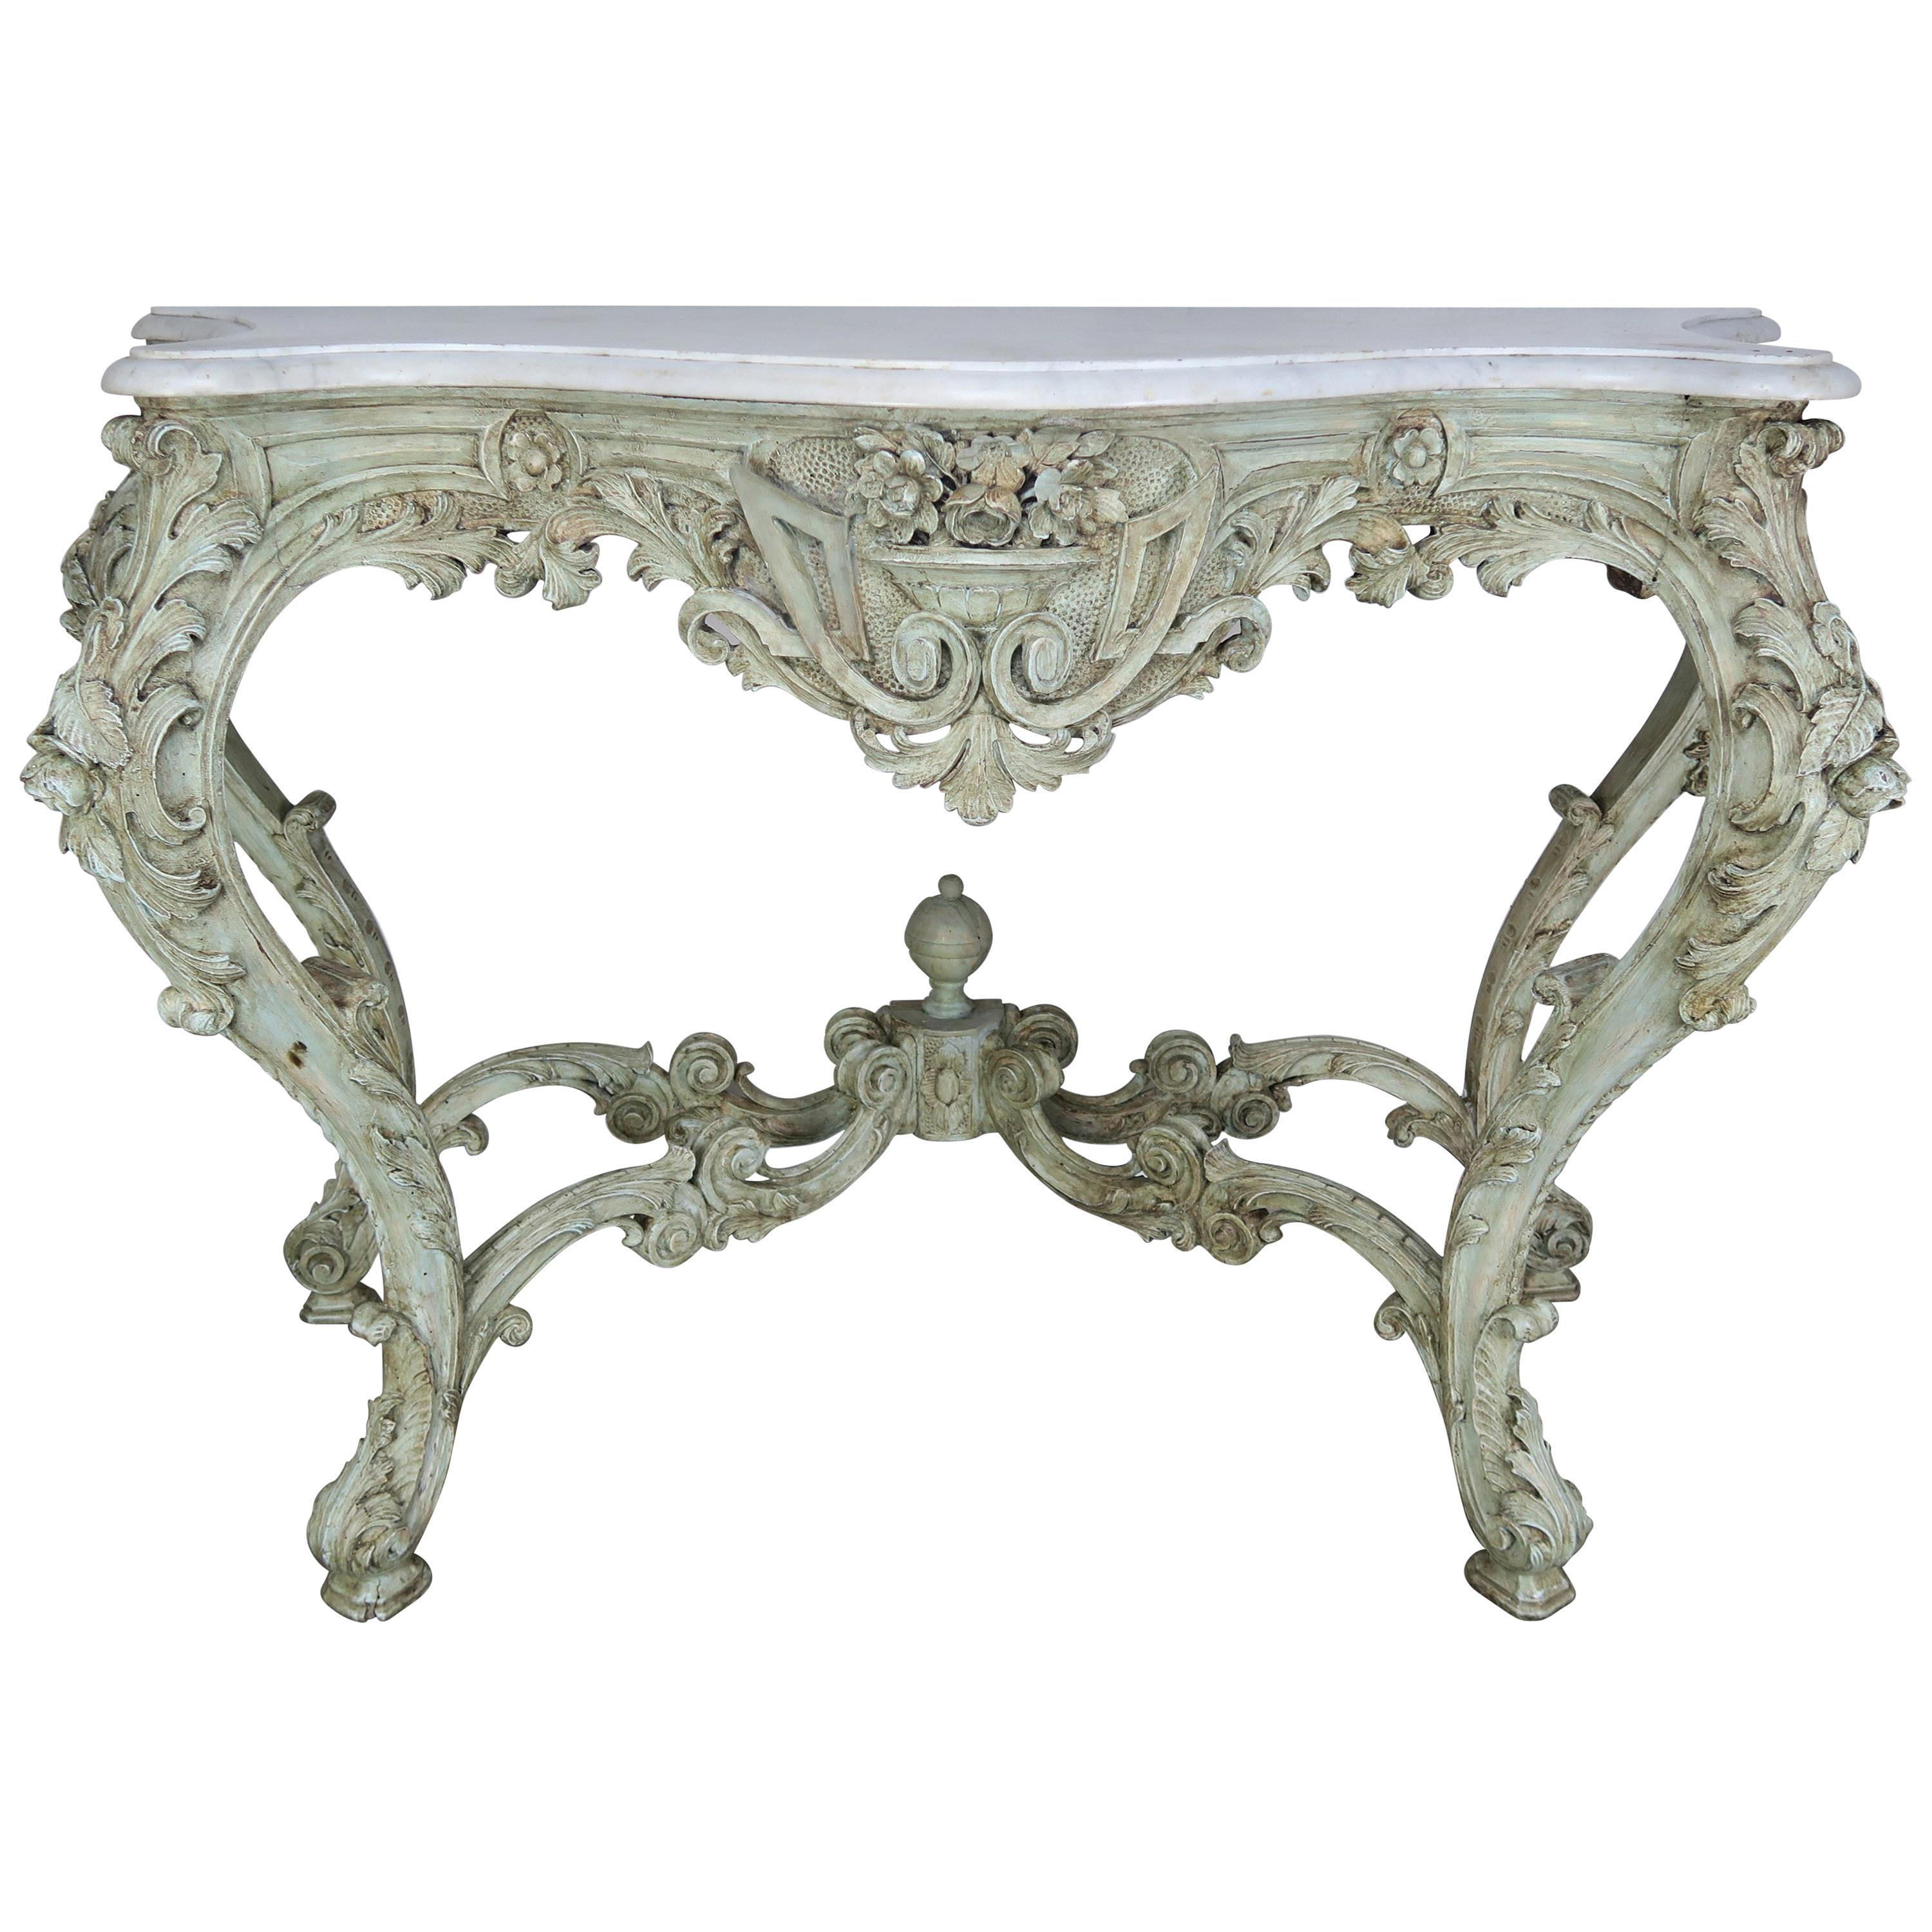 19th Century French Rococo Style Painted Console with Carrara Marble Top